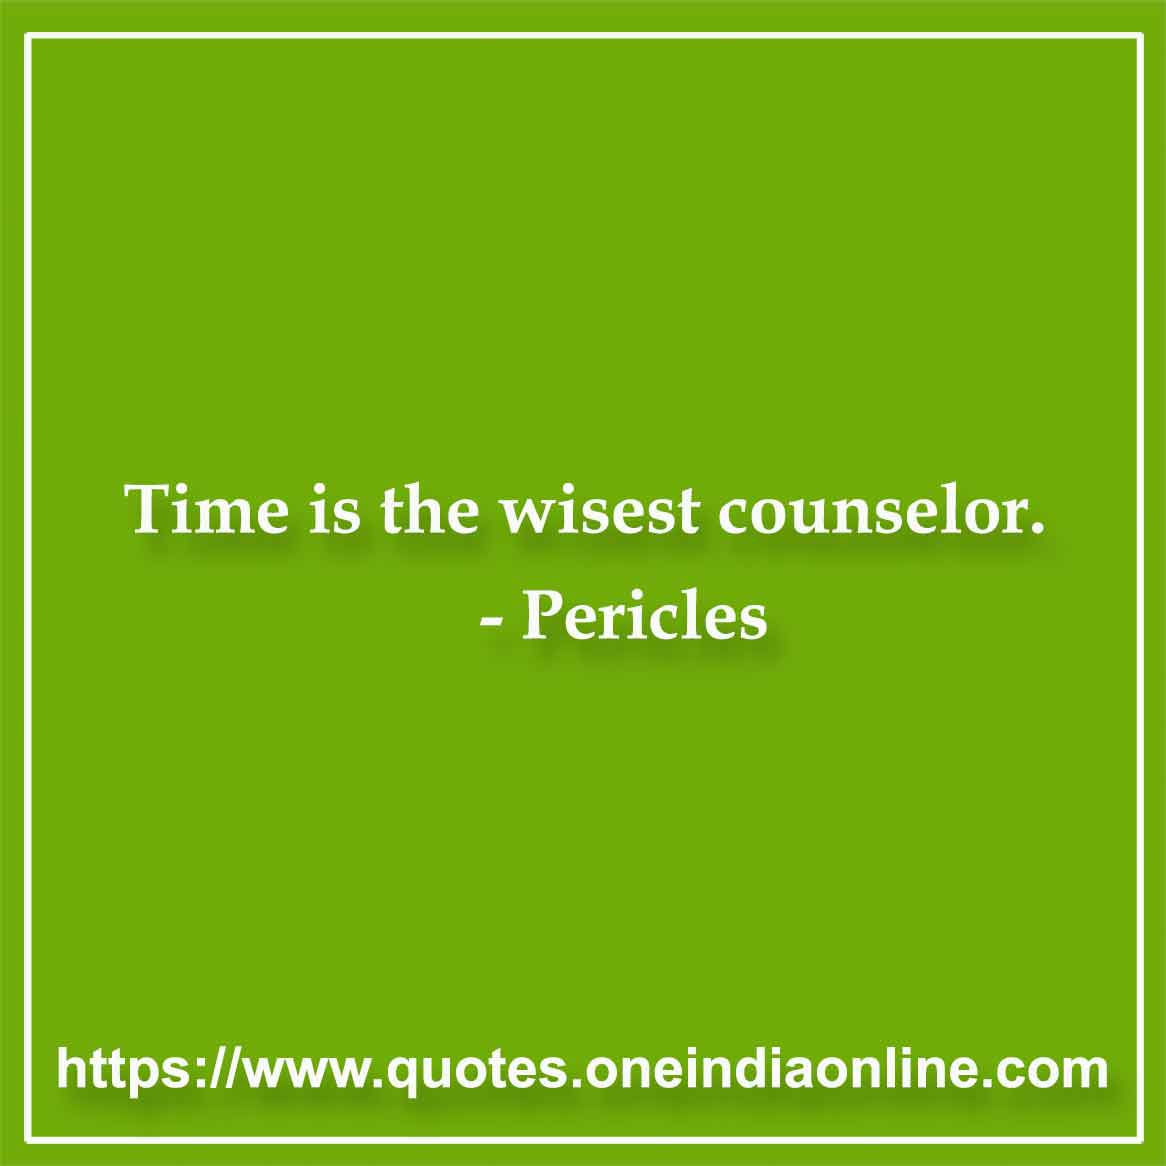 Time is the wisest counselor.

- Time Thoughts by Pericle